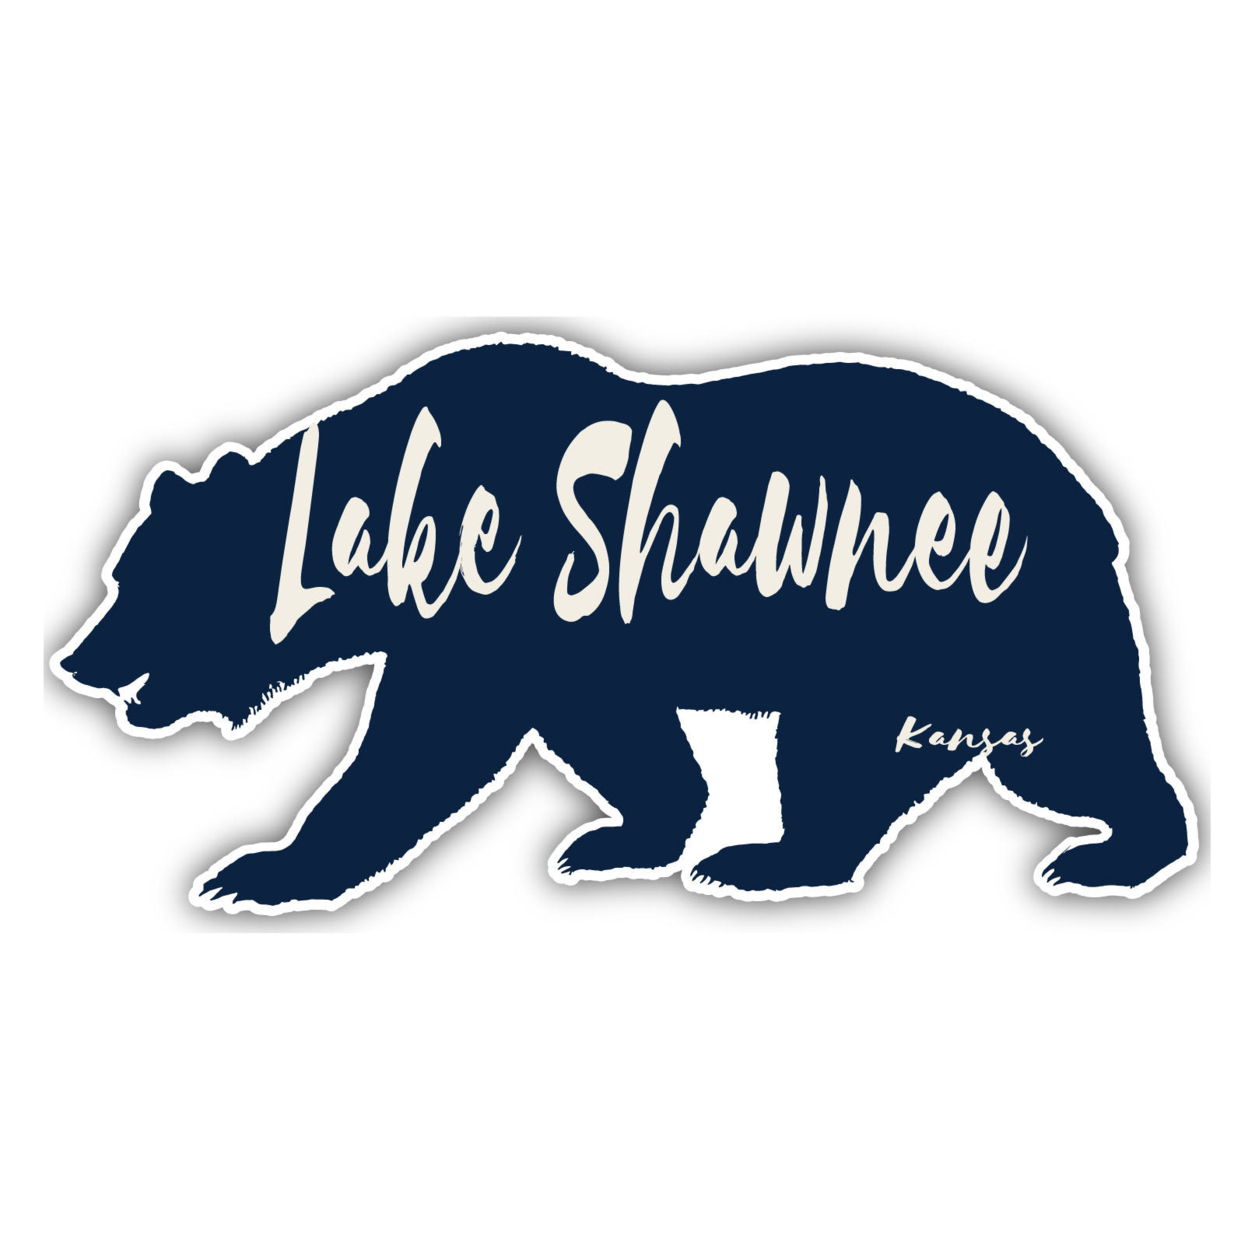 Lake Lurleen Alabama Souvenir Decorative Stickers (Choose Theme And Size) - 4-Inch, Great Outdoors